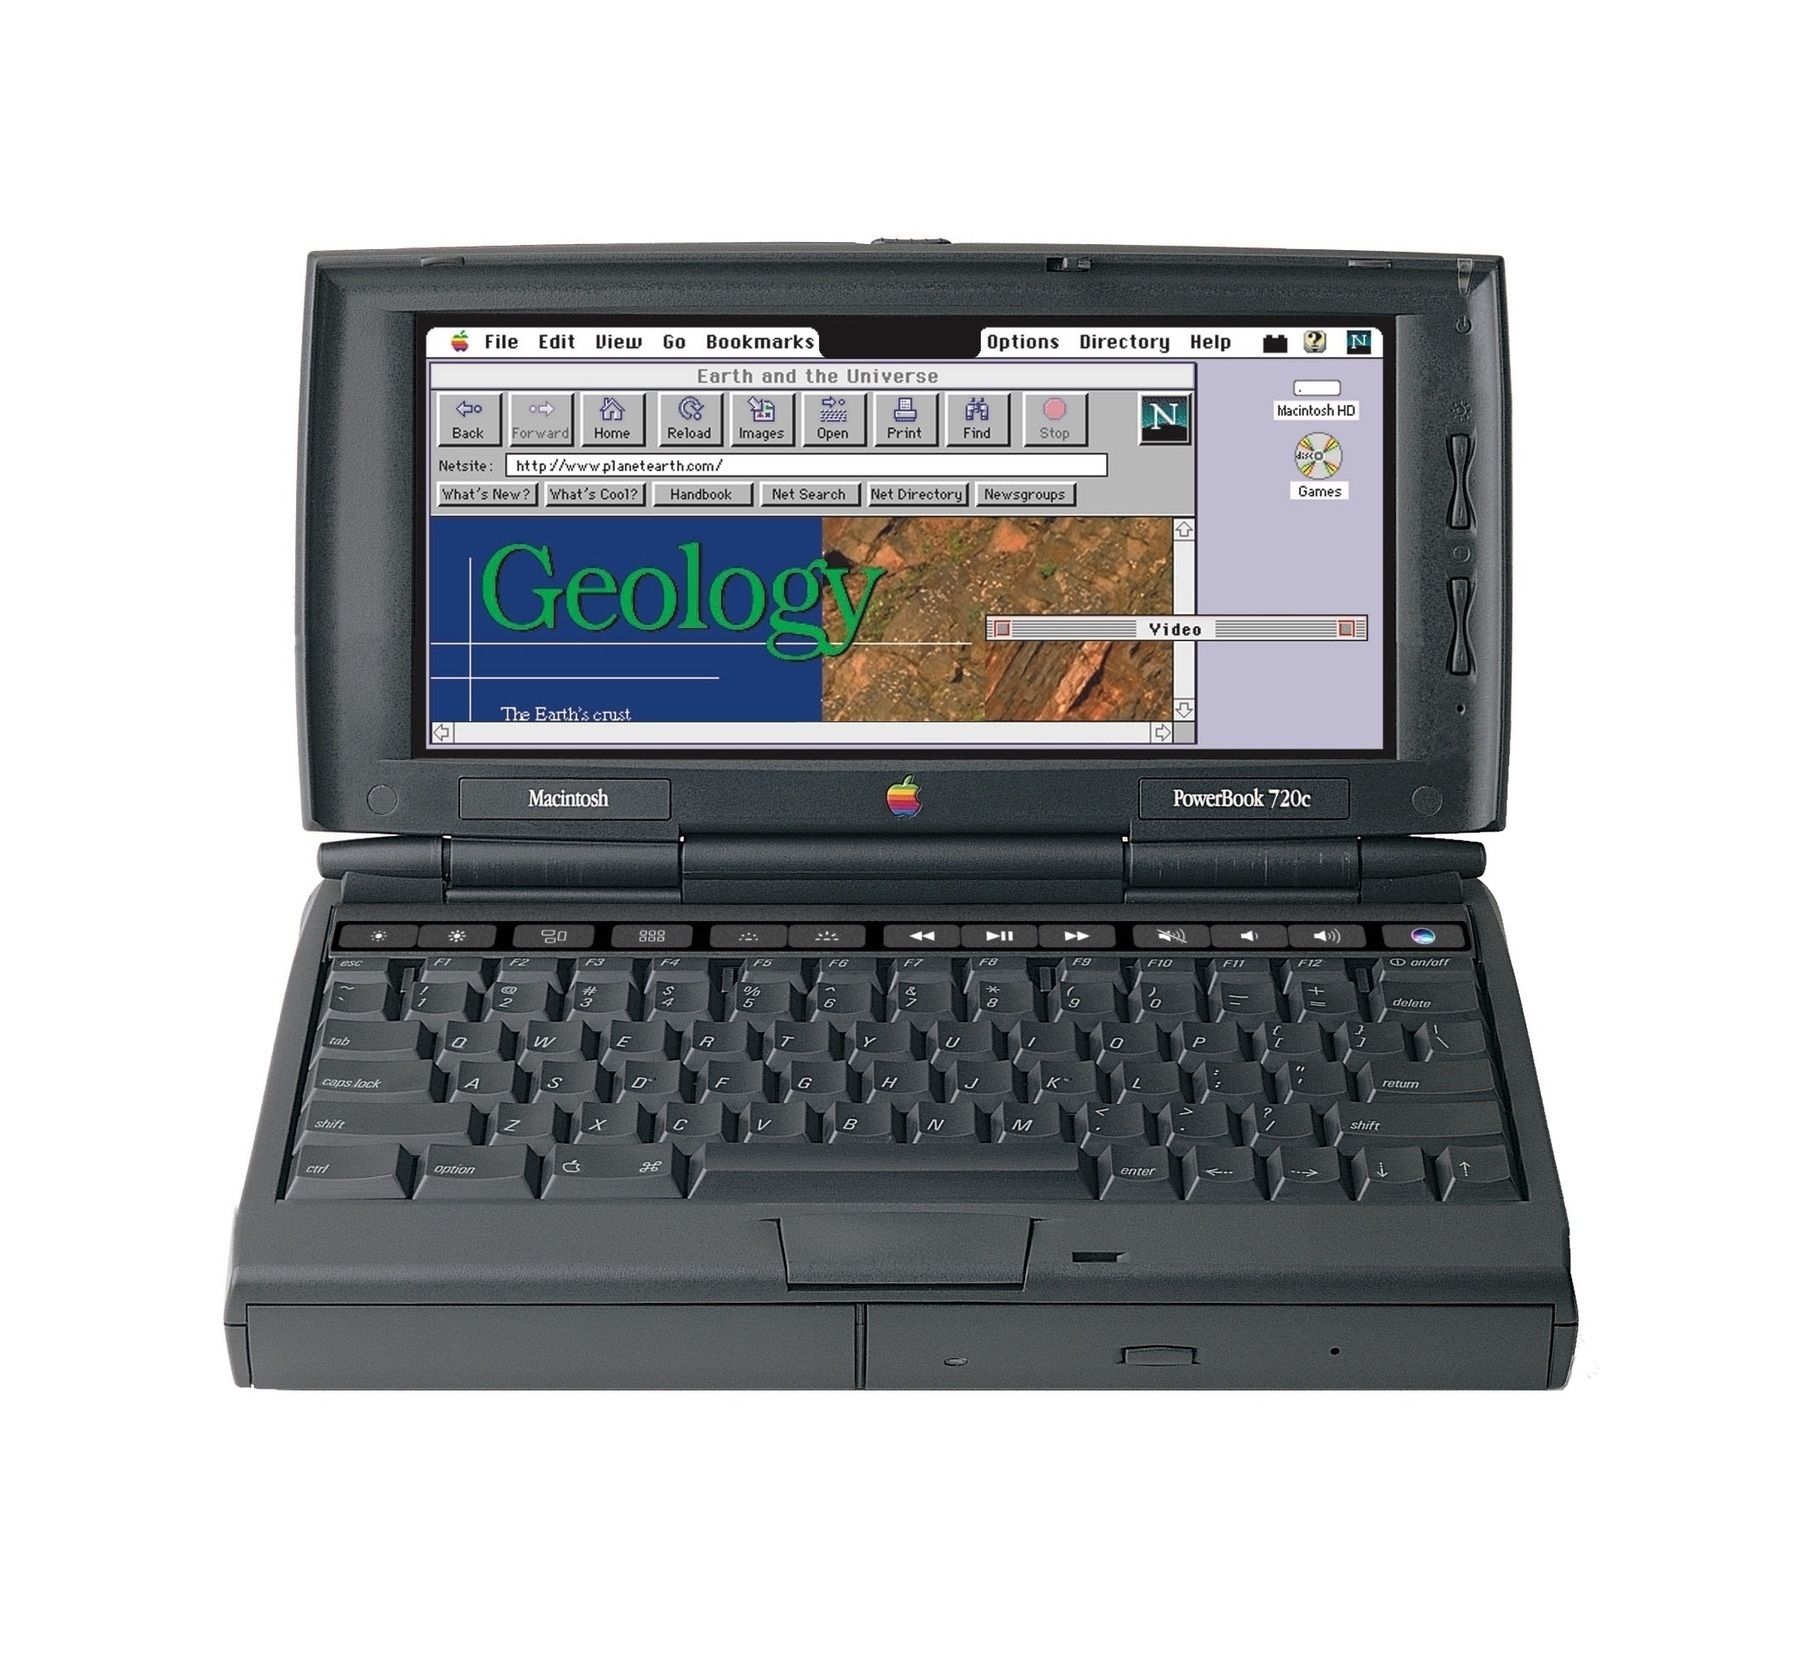 PowerBook 720c with Notch, and TouchBar.